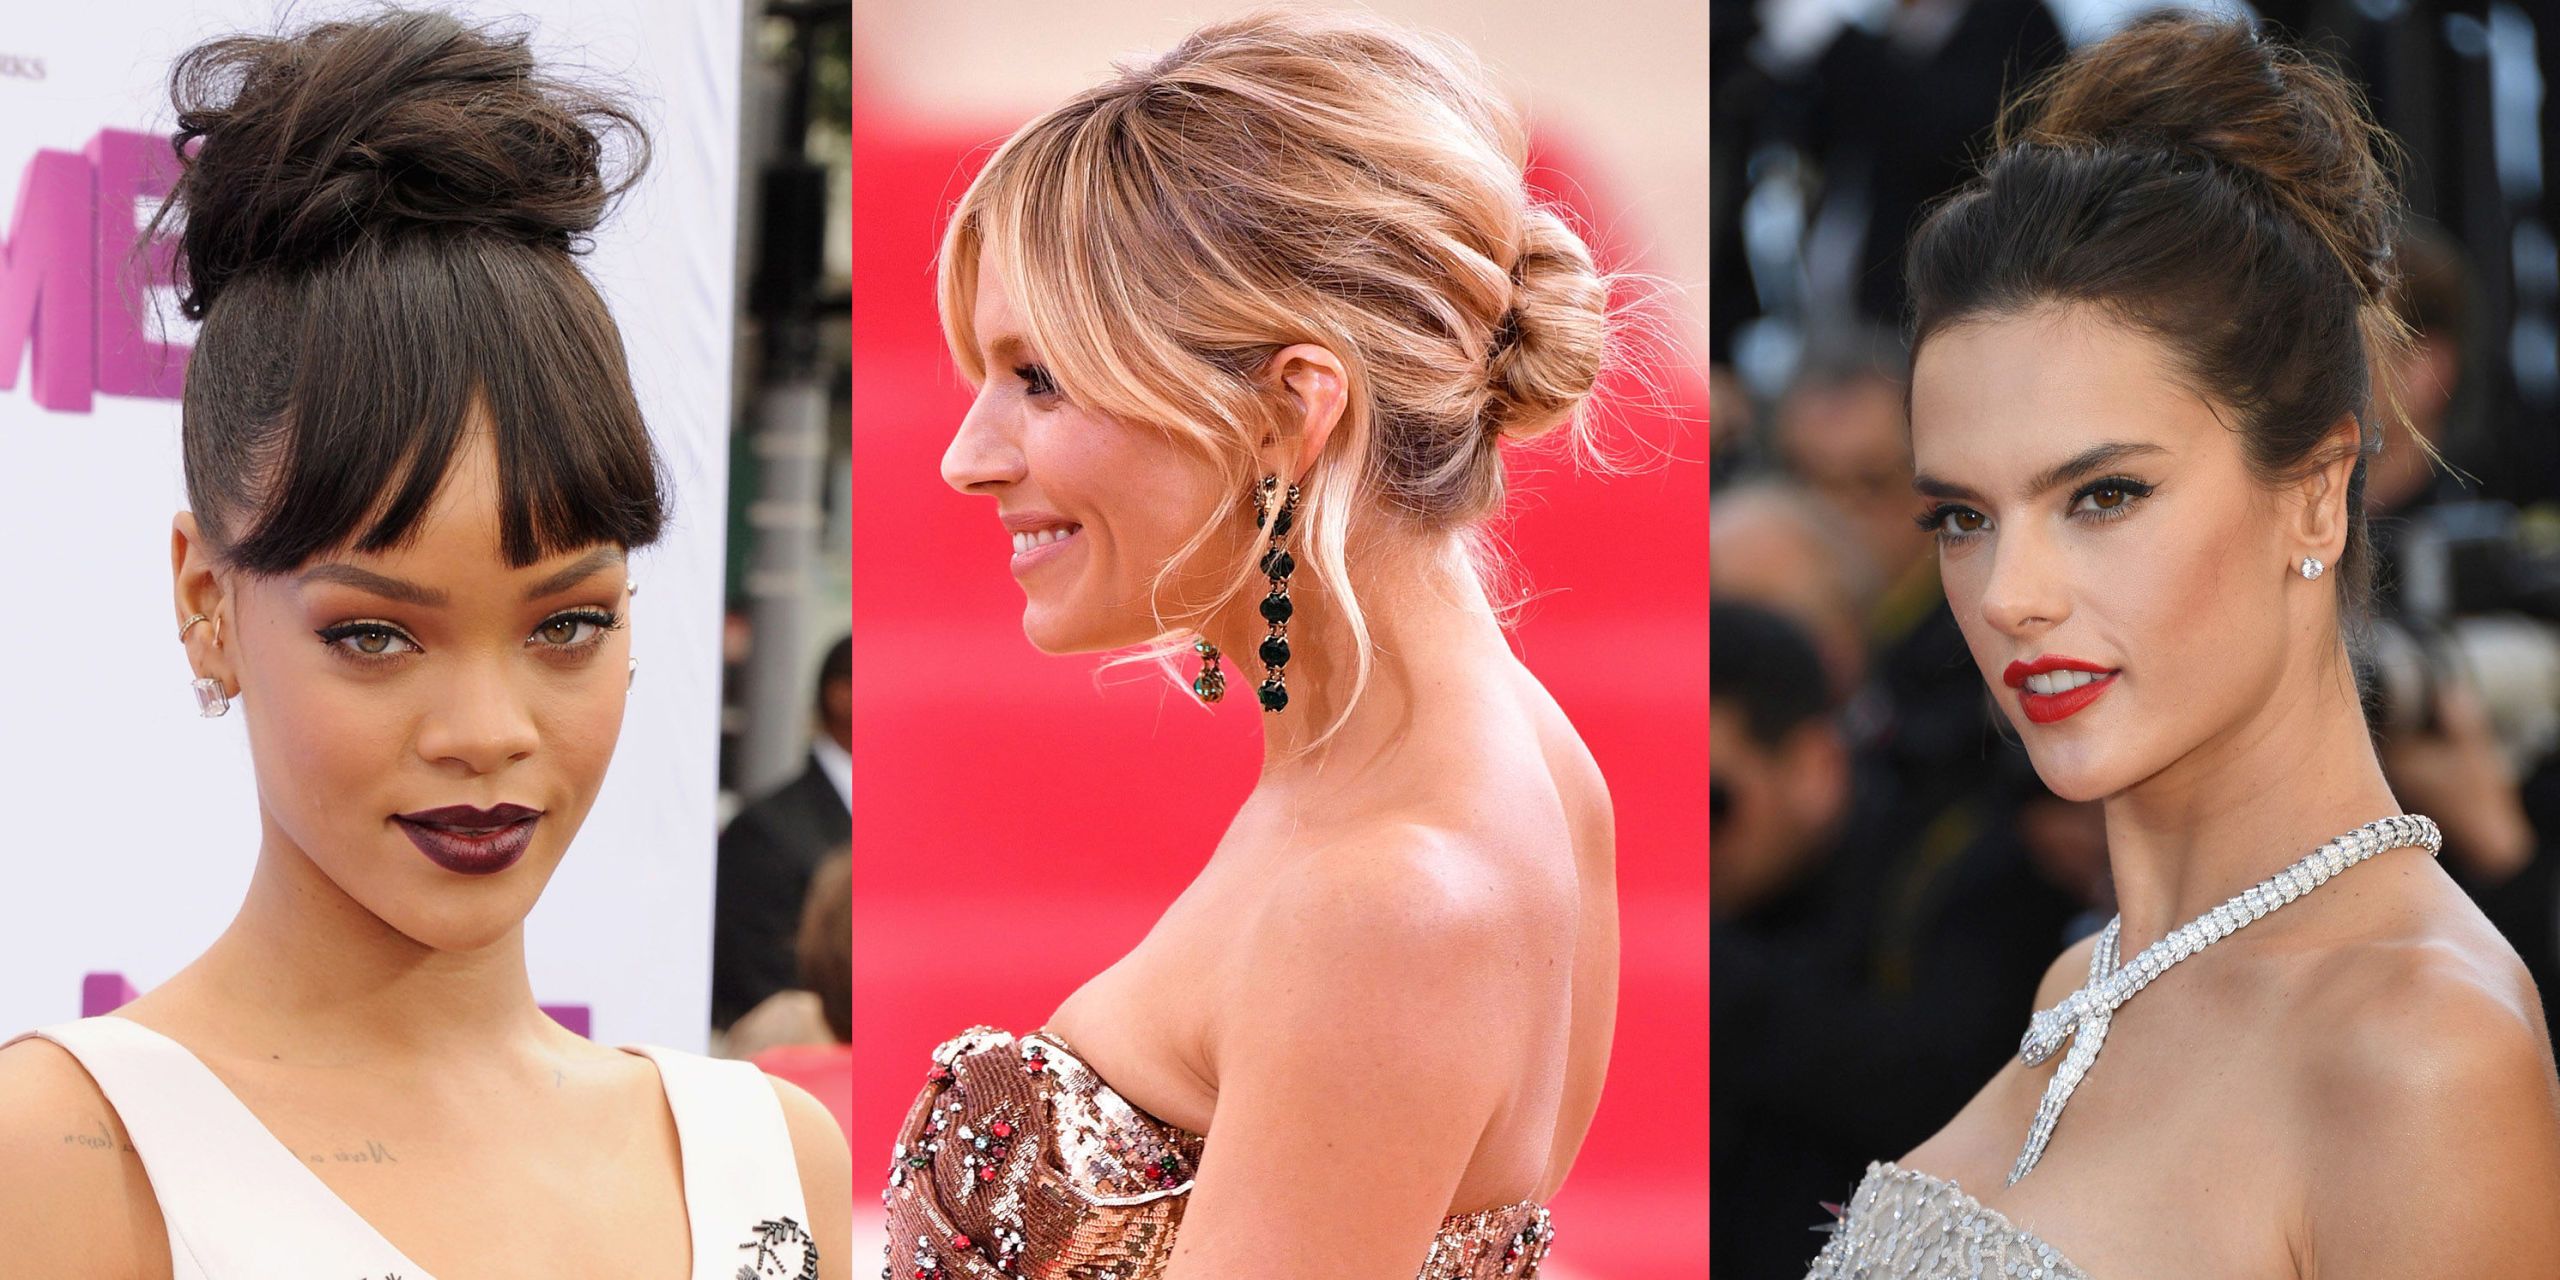 Tying the knot? Bookmark these 8 stunning bun bridal hairstyles for  weddings!